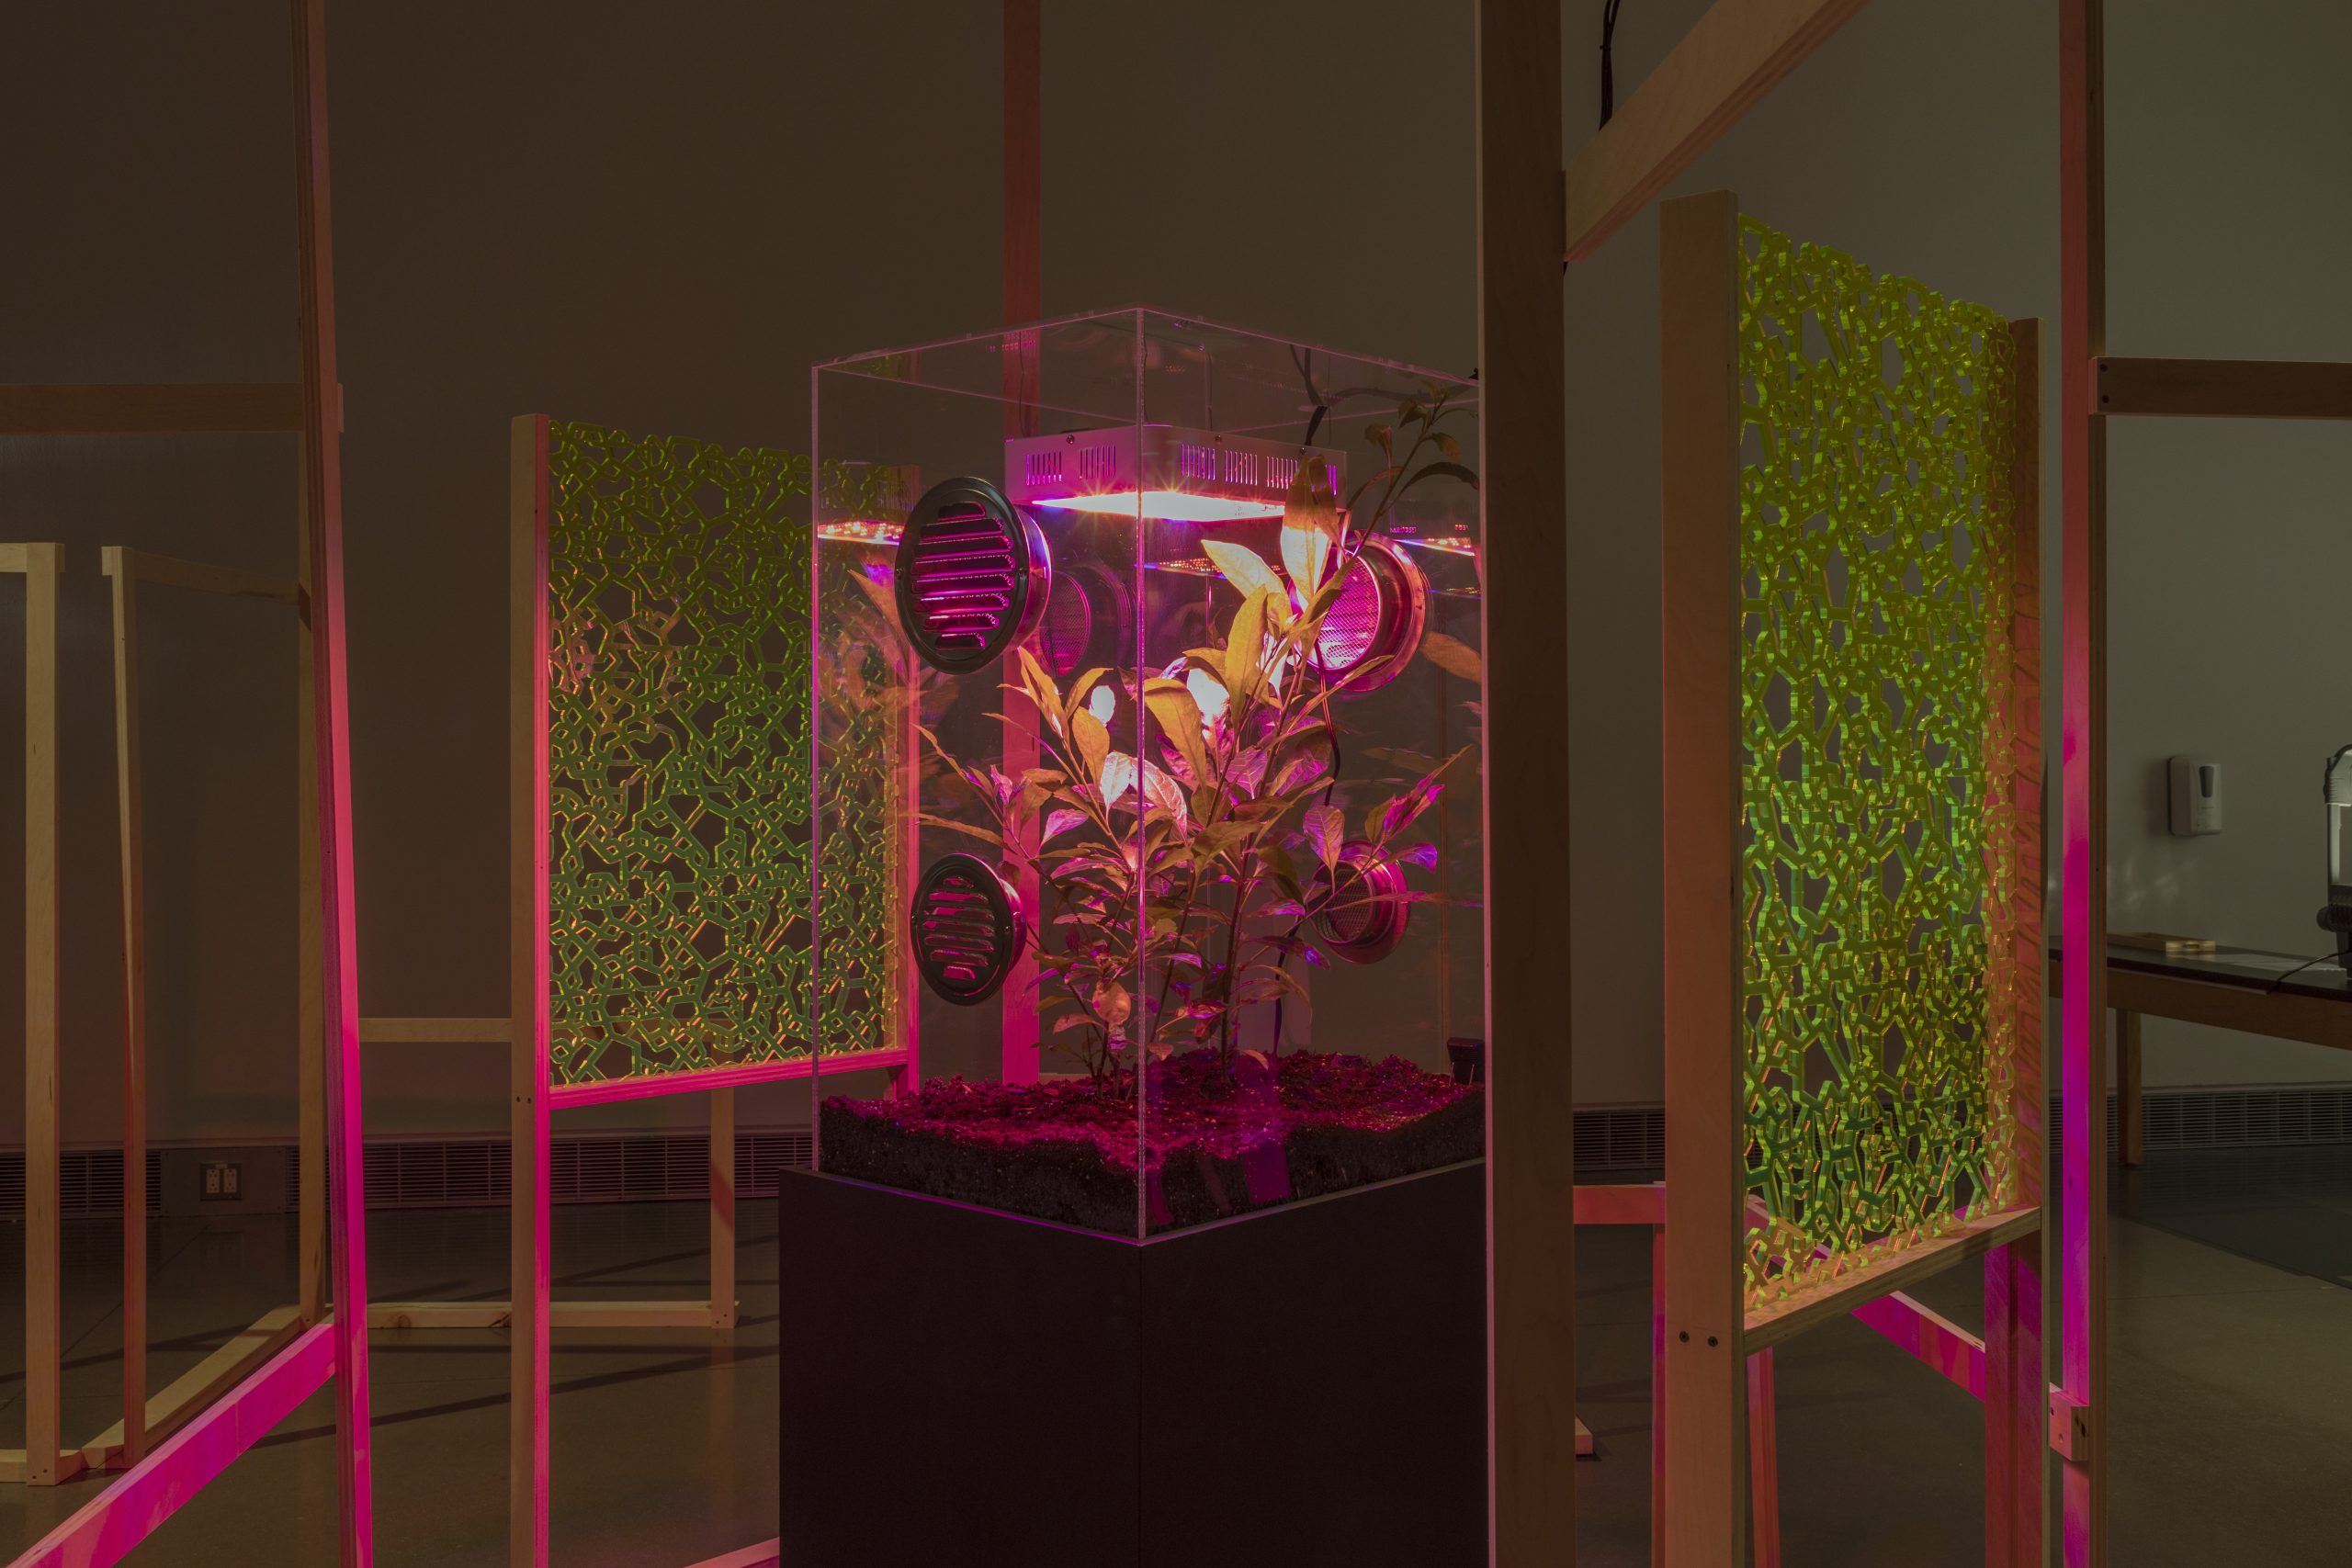 On a black podium a clear plexiglass box houses a plant growing out of a thin layer of soil. The plexiglass box has four metal vents and UV lights feeding the plant from above. The UV light in the box is bright and reflecting pinkish-purple light into the room. Framing the box is two sheets of lime-green plexiglass that have a cut-out mosaic pattern.